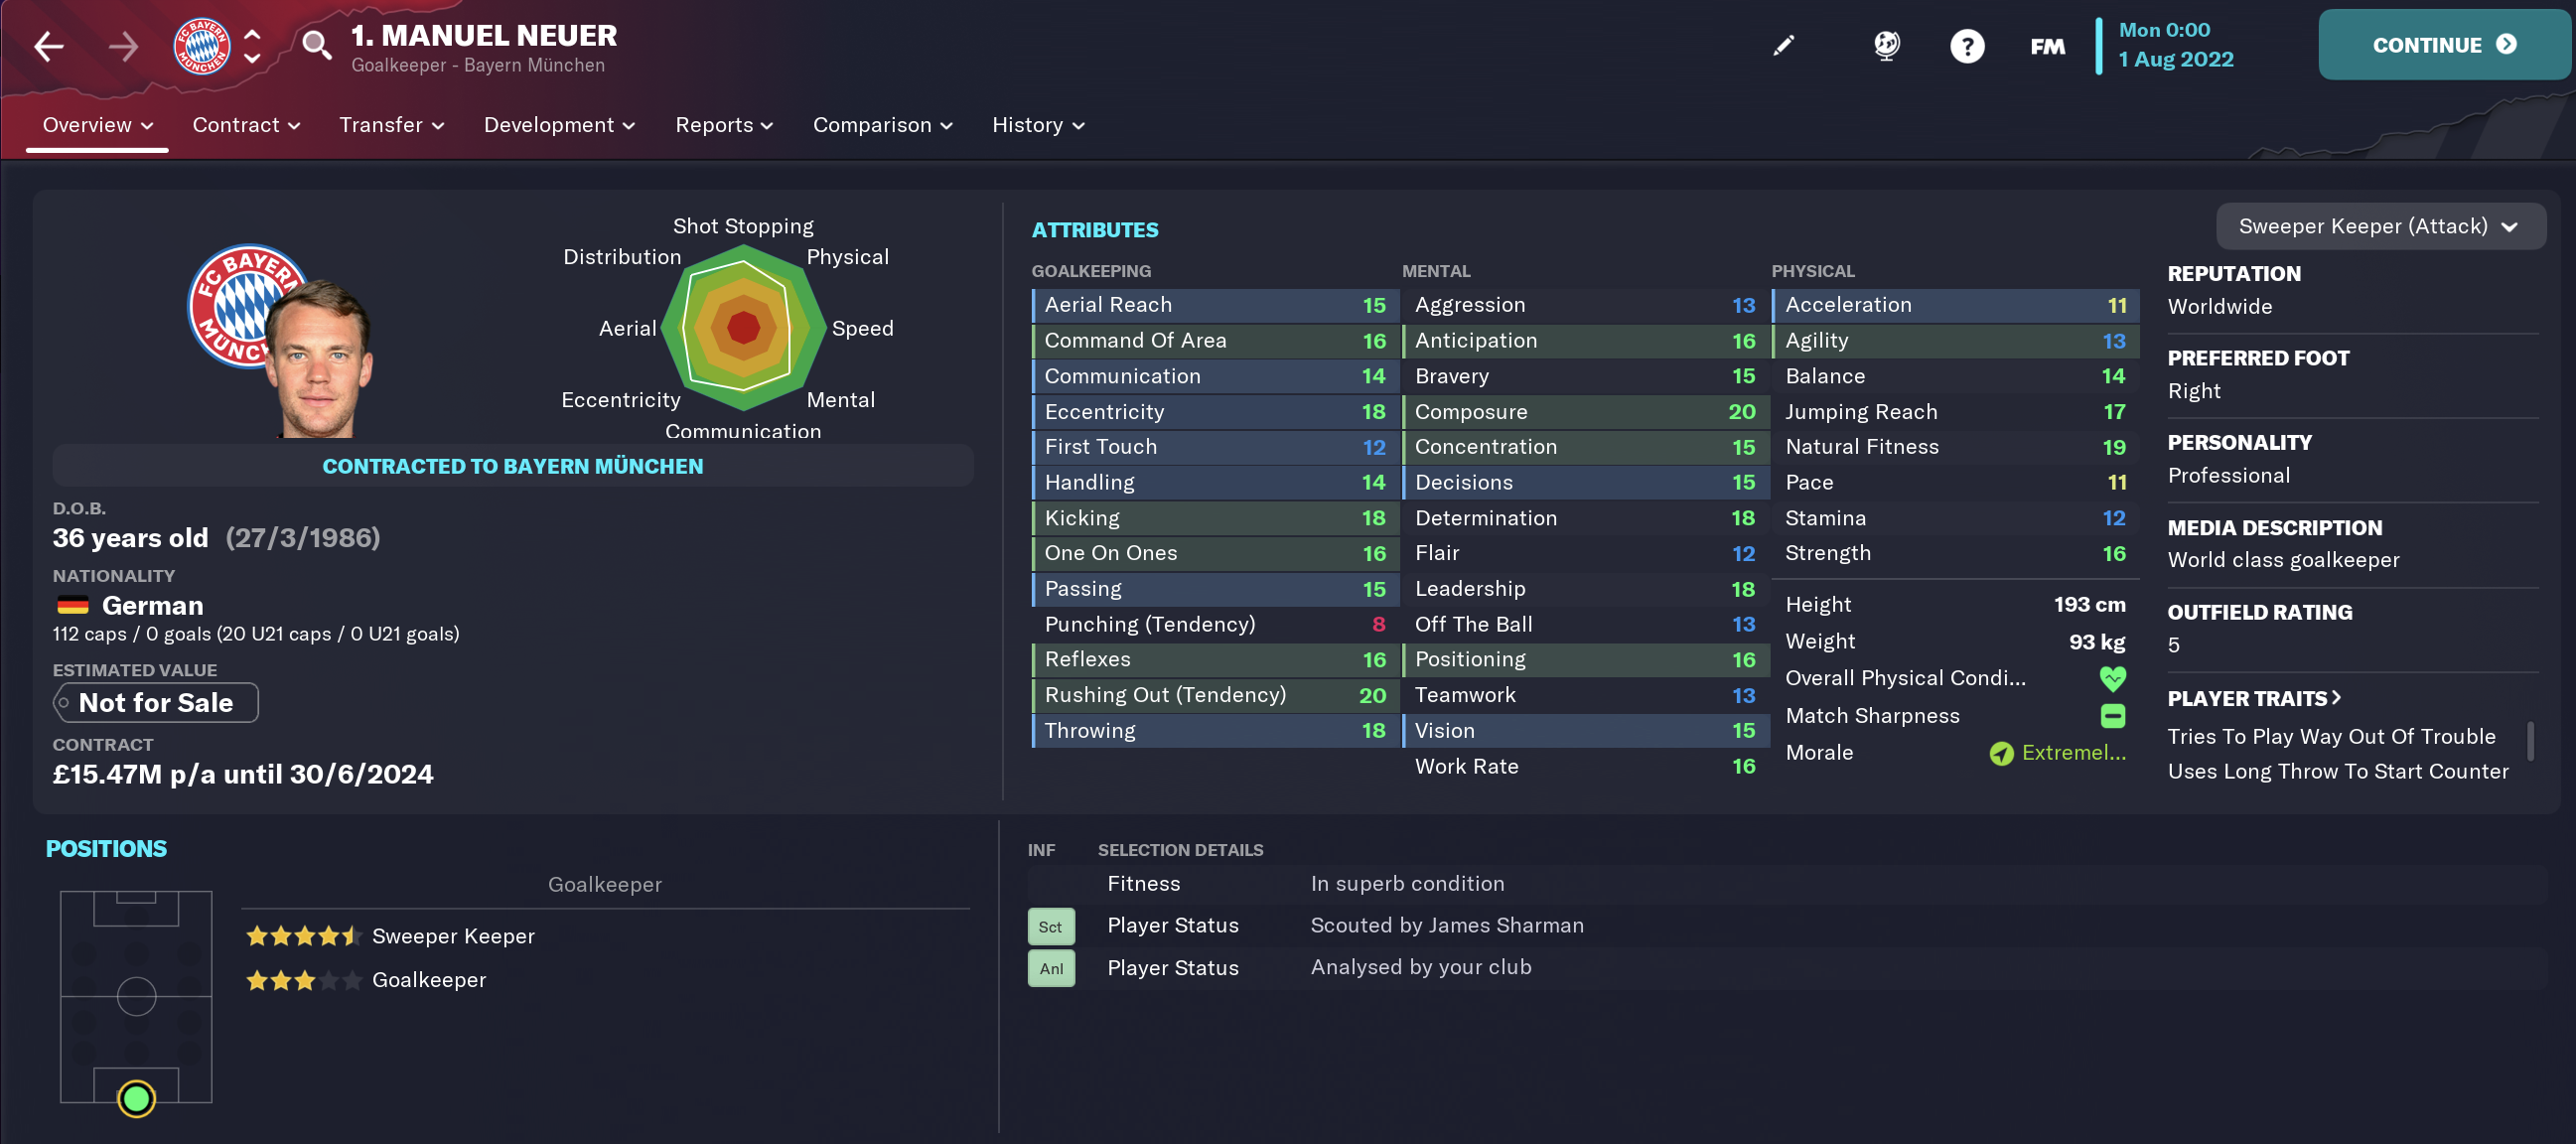 Best FM 2023 Goalkeepers to sign Manuel Neuer